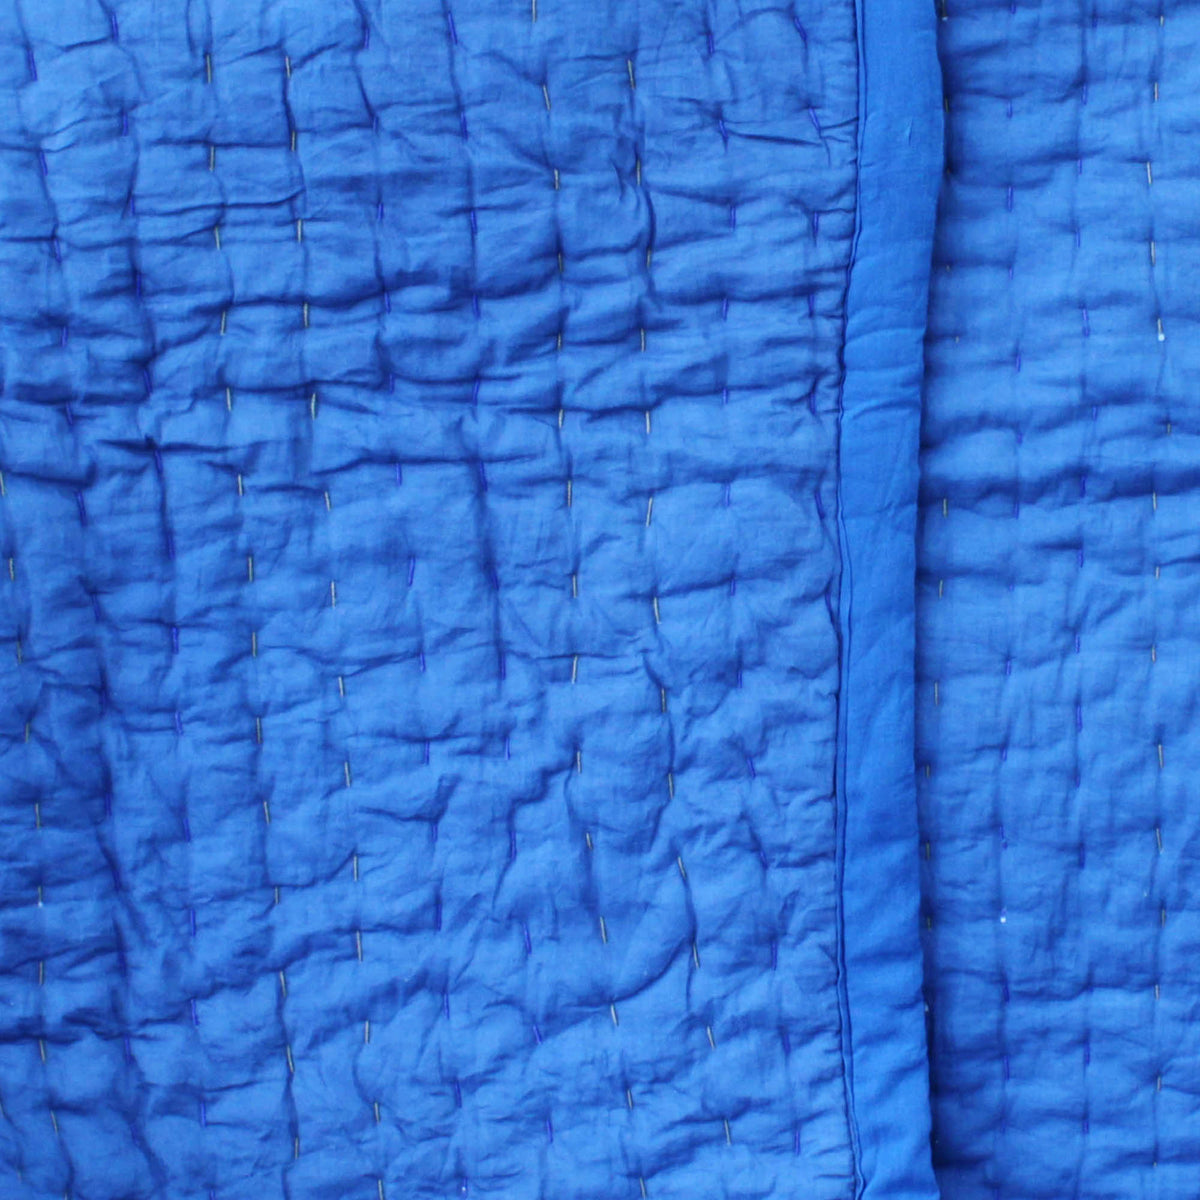 Blue Cotton Quilted Soft Baby Kantha Quilt